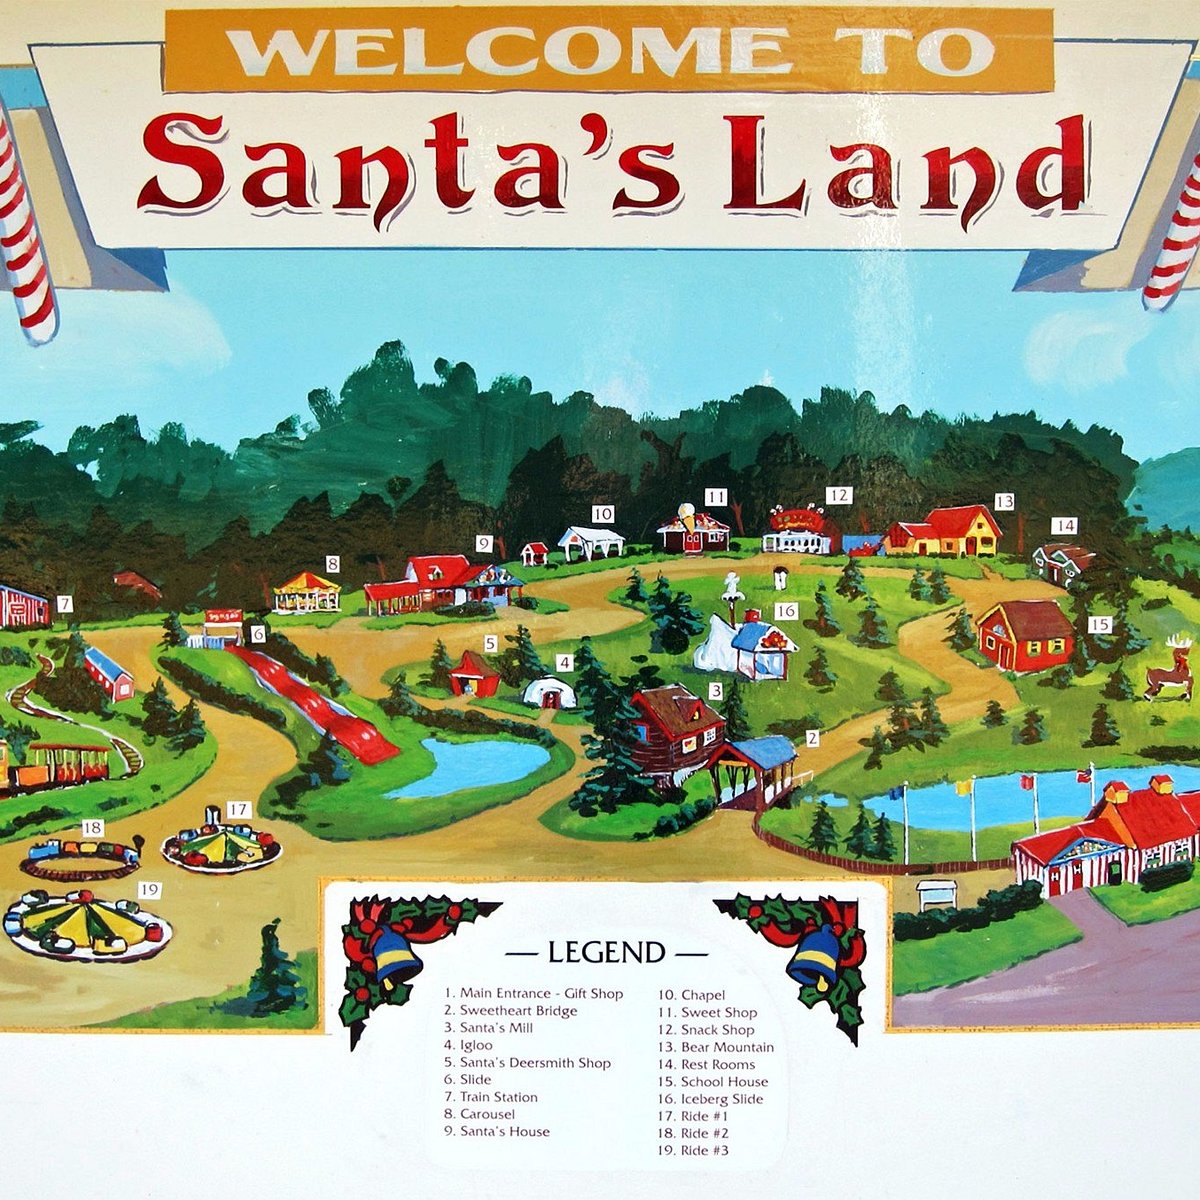 SANTA'S LAND USA (Putney) 2022 What to Know BEFORE You Go